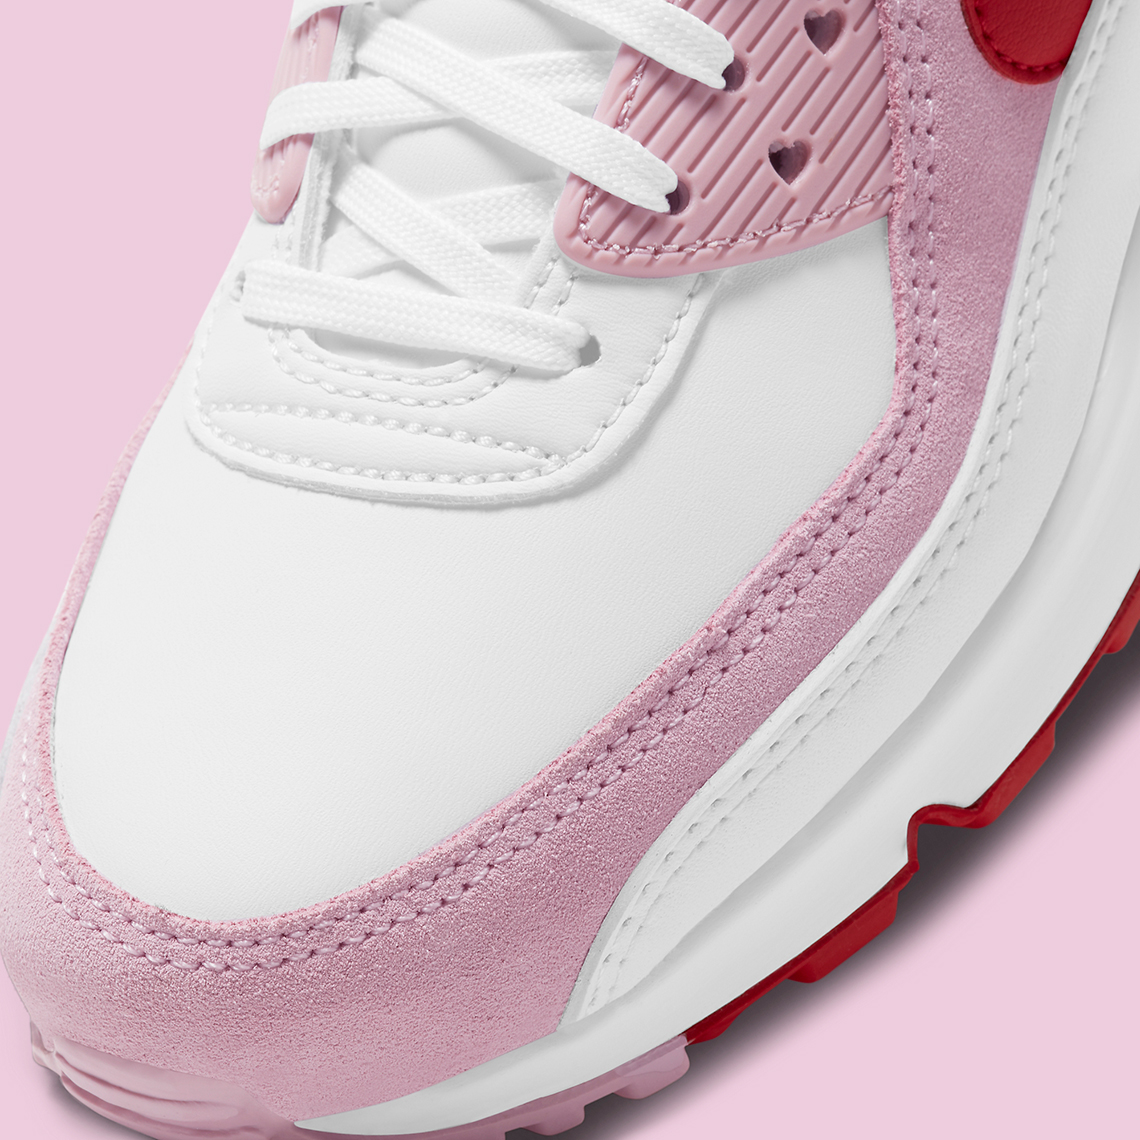 Nike Air Max 90 Valentines Day 2021 DD8029-100 Release Info 